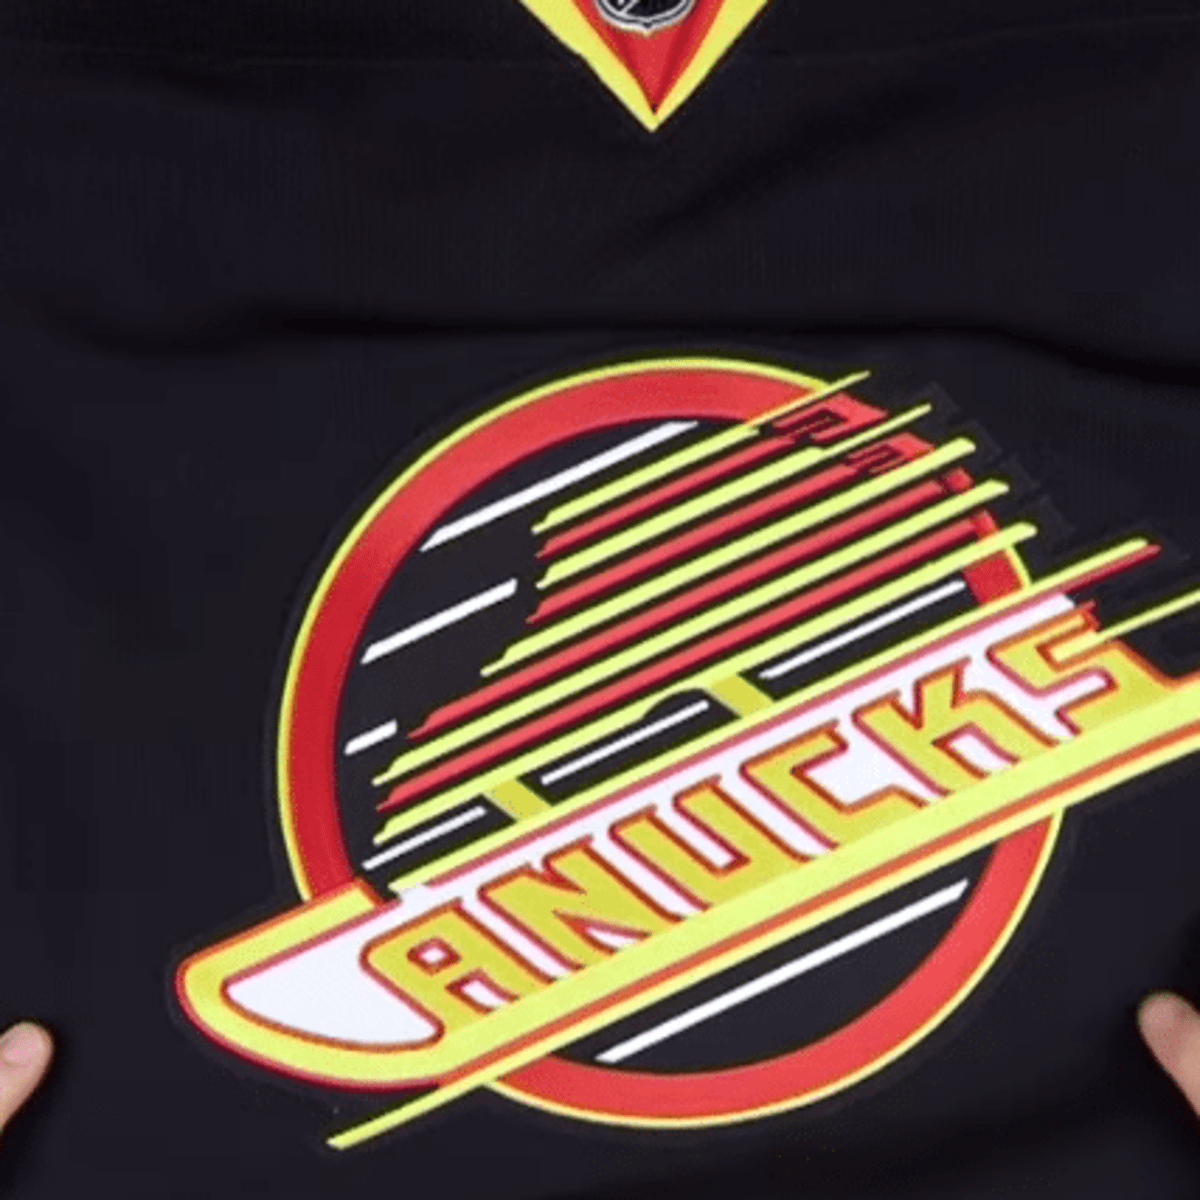 Canucks fans love the Flying Skate jersey and other things we've